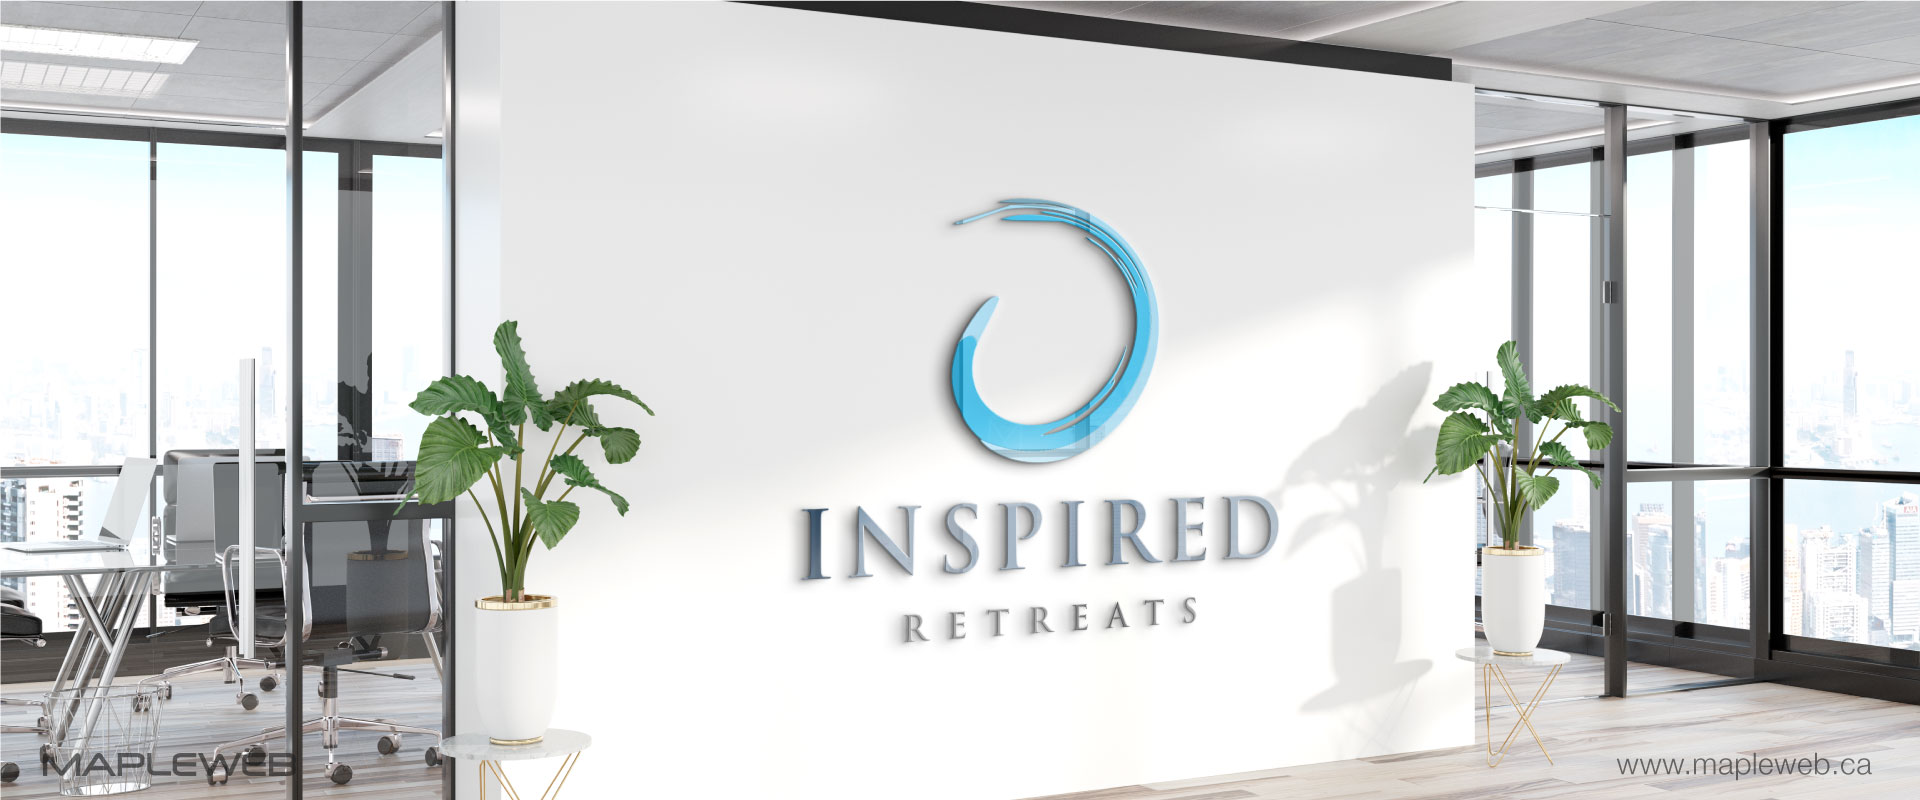 inspired-retreats-brand-logo-design-by-mapleweb-vancouver-canada-white-wall-mock